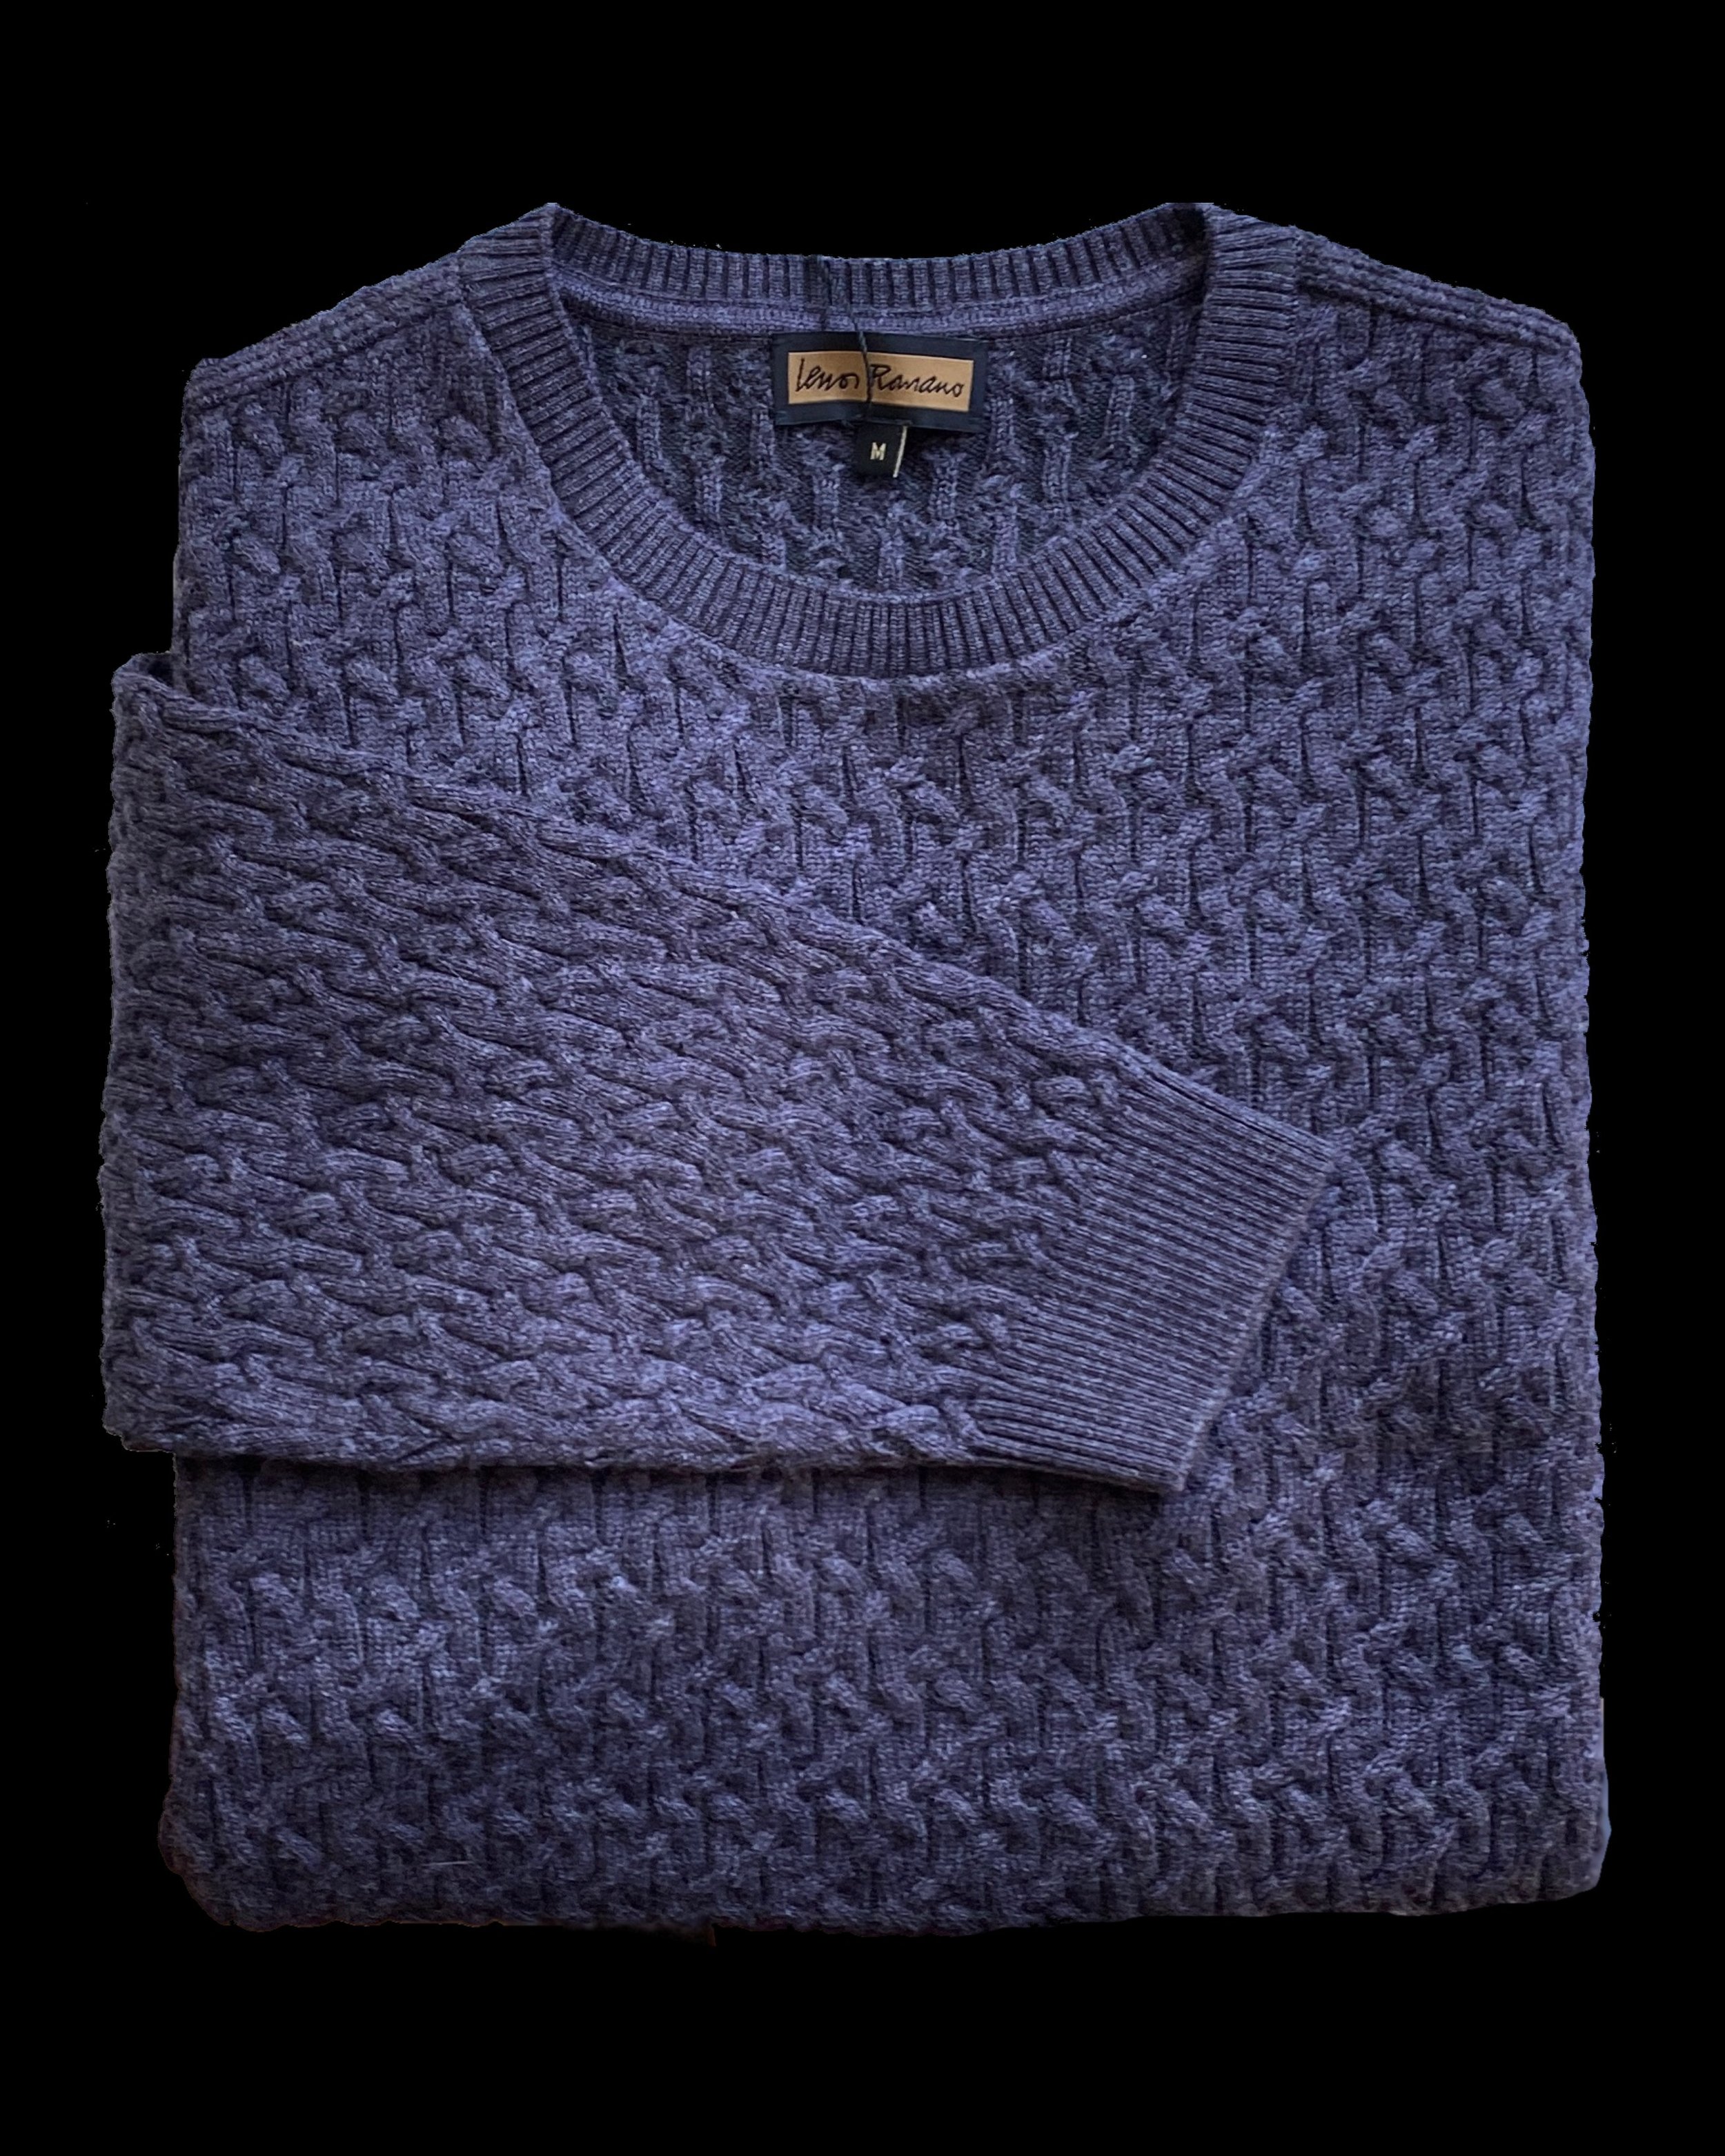 Shop Best Men's Sweaters Online: Crewneck, Cable, Cashmere, and More ...